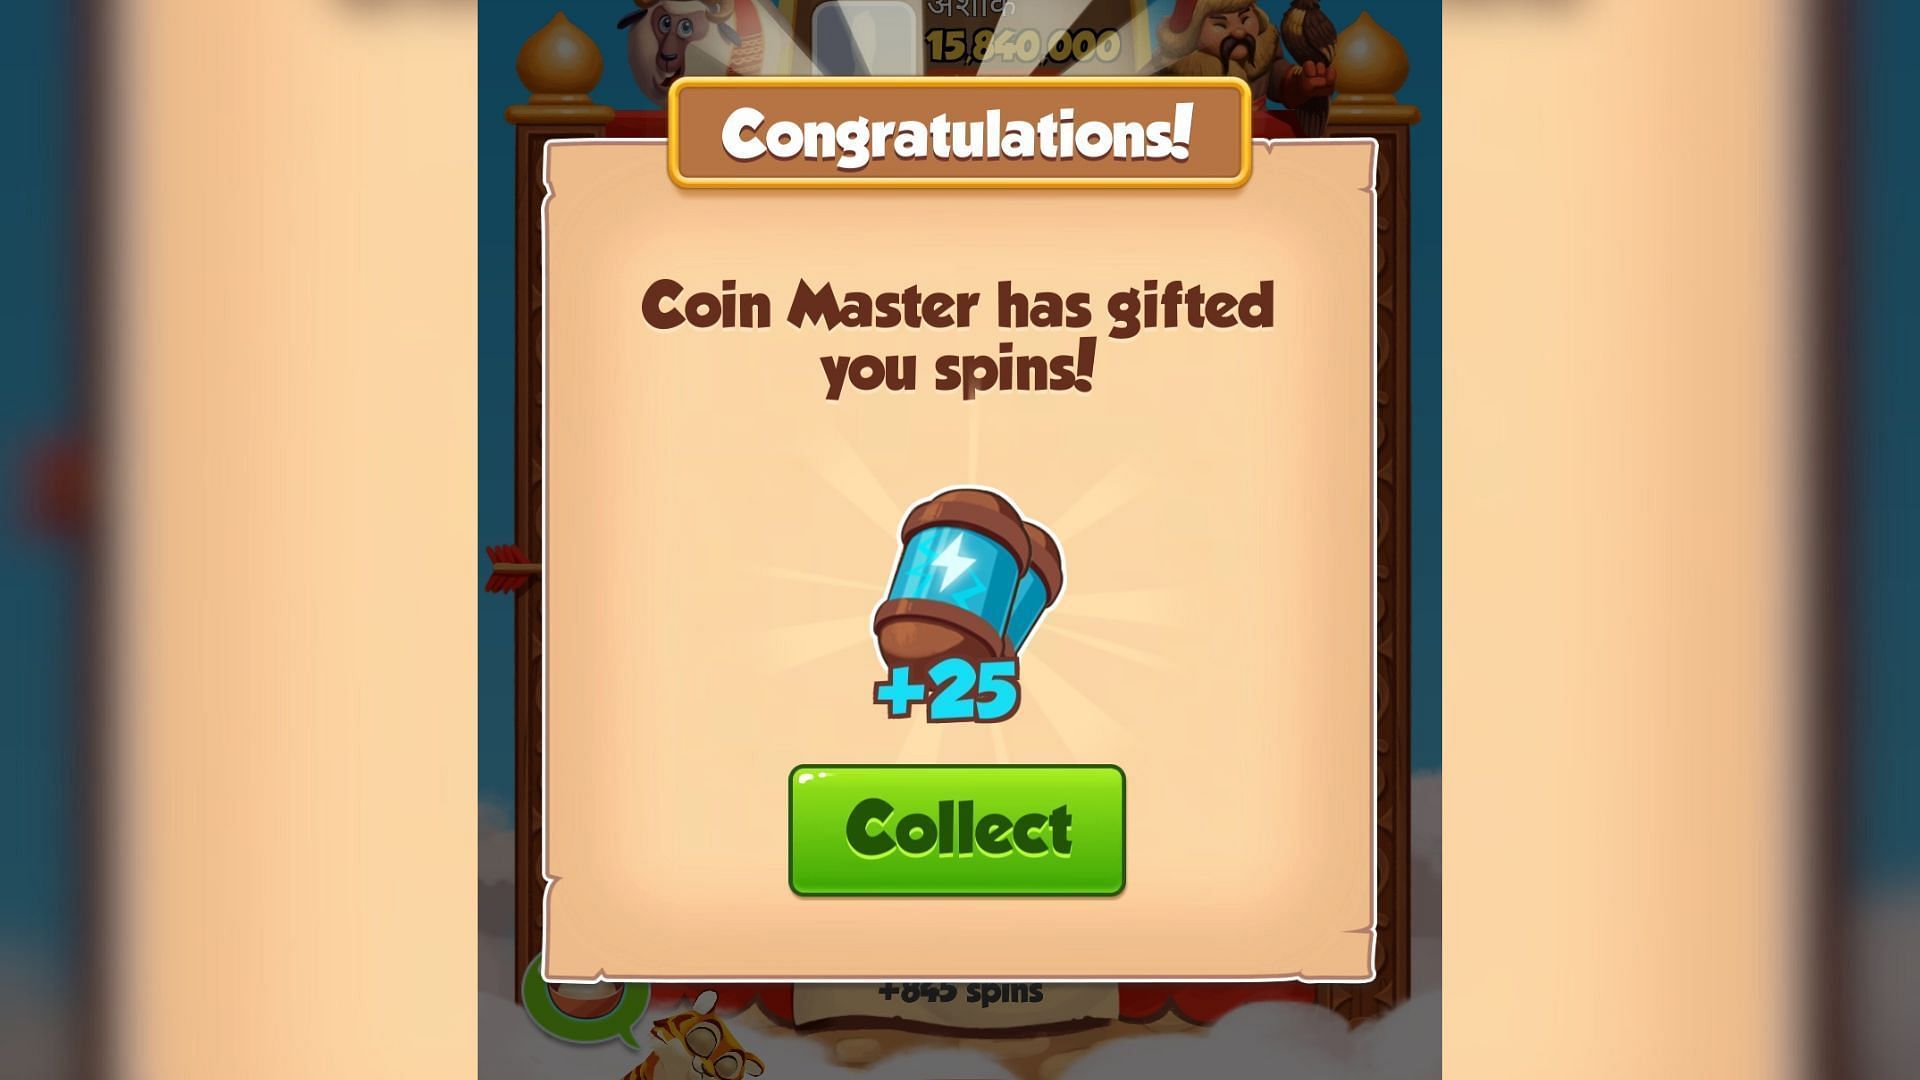 Tap the green Collect button to get Coin Master free spins (Image via Moon Active)